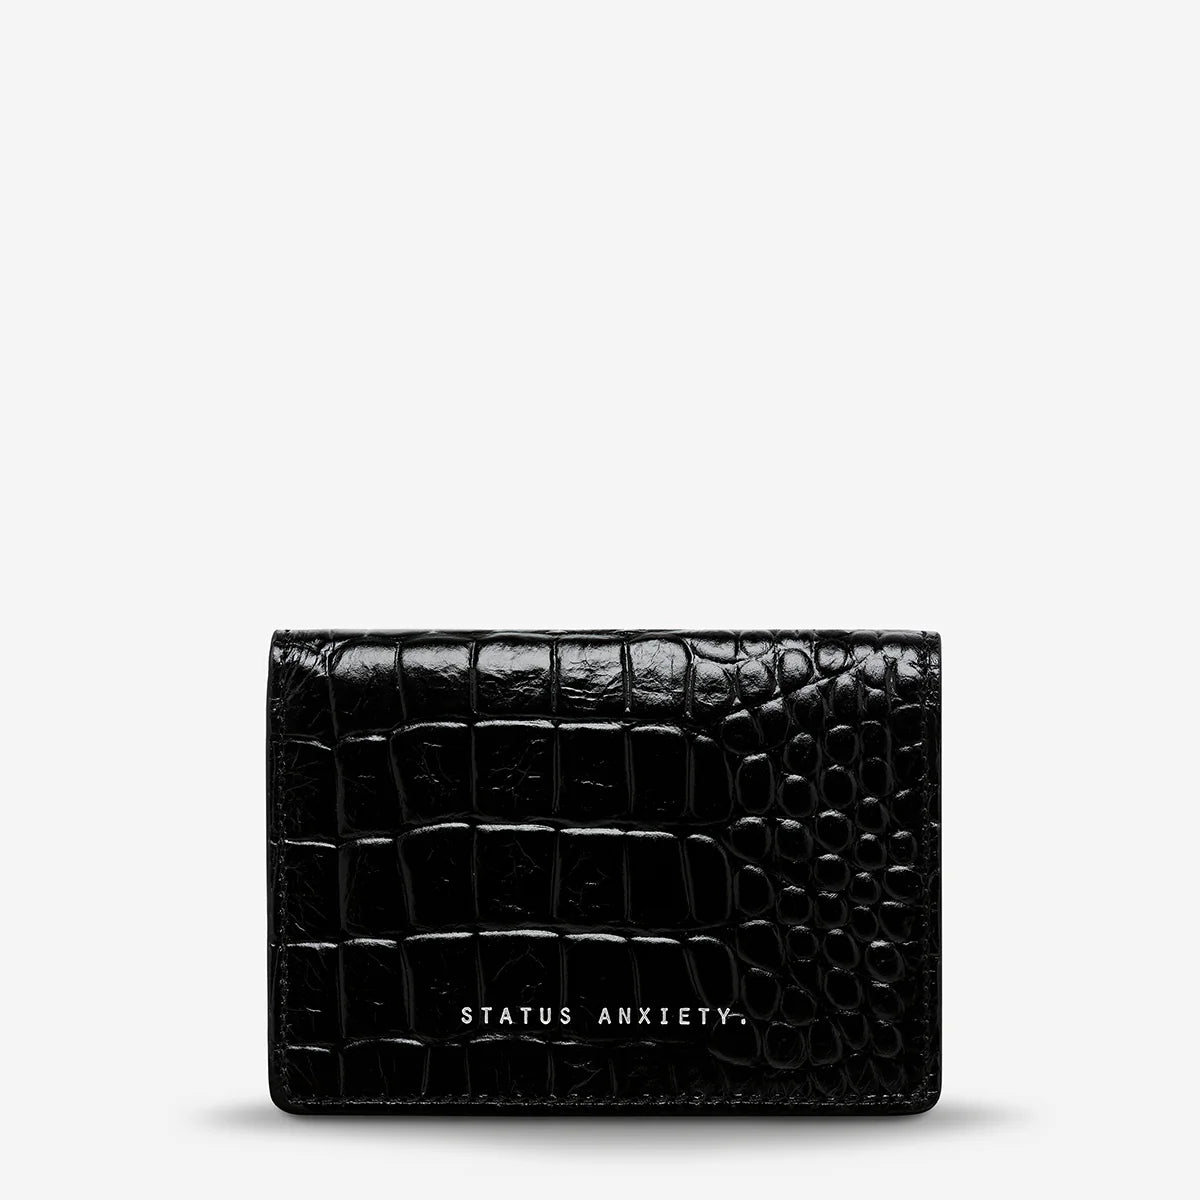 STATUS ANXIETY // Easy Does It BLACK CROC EMBOSS